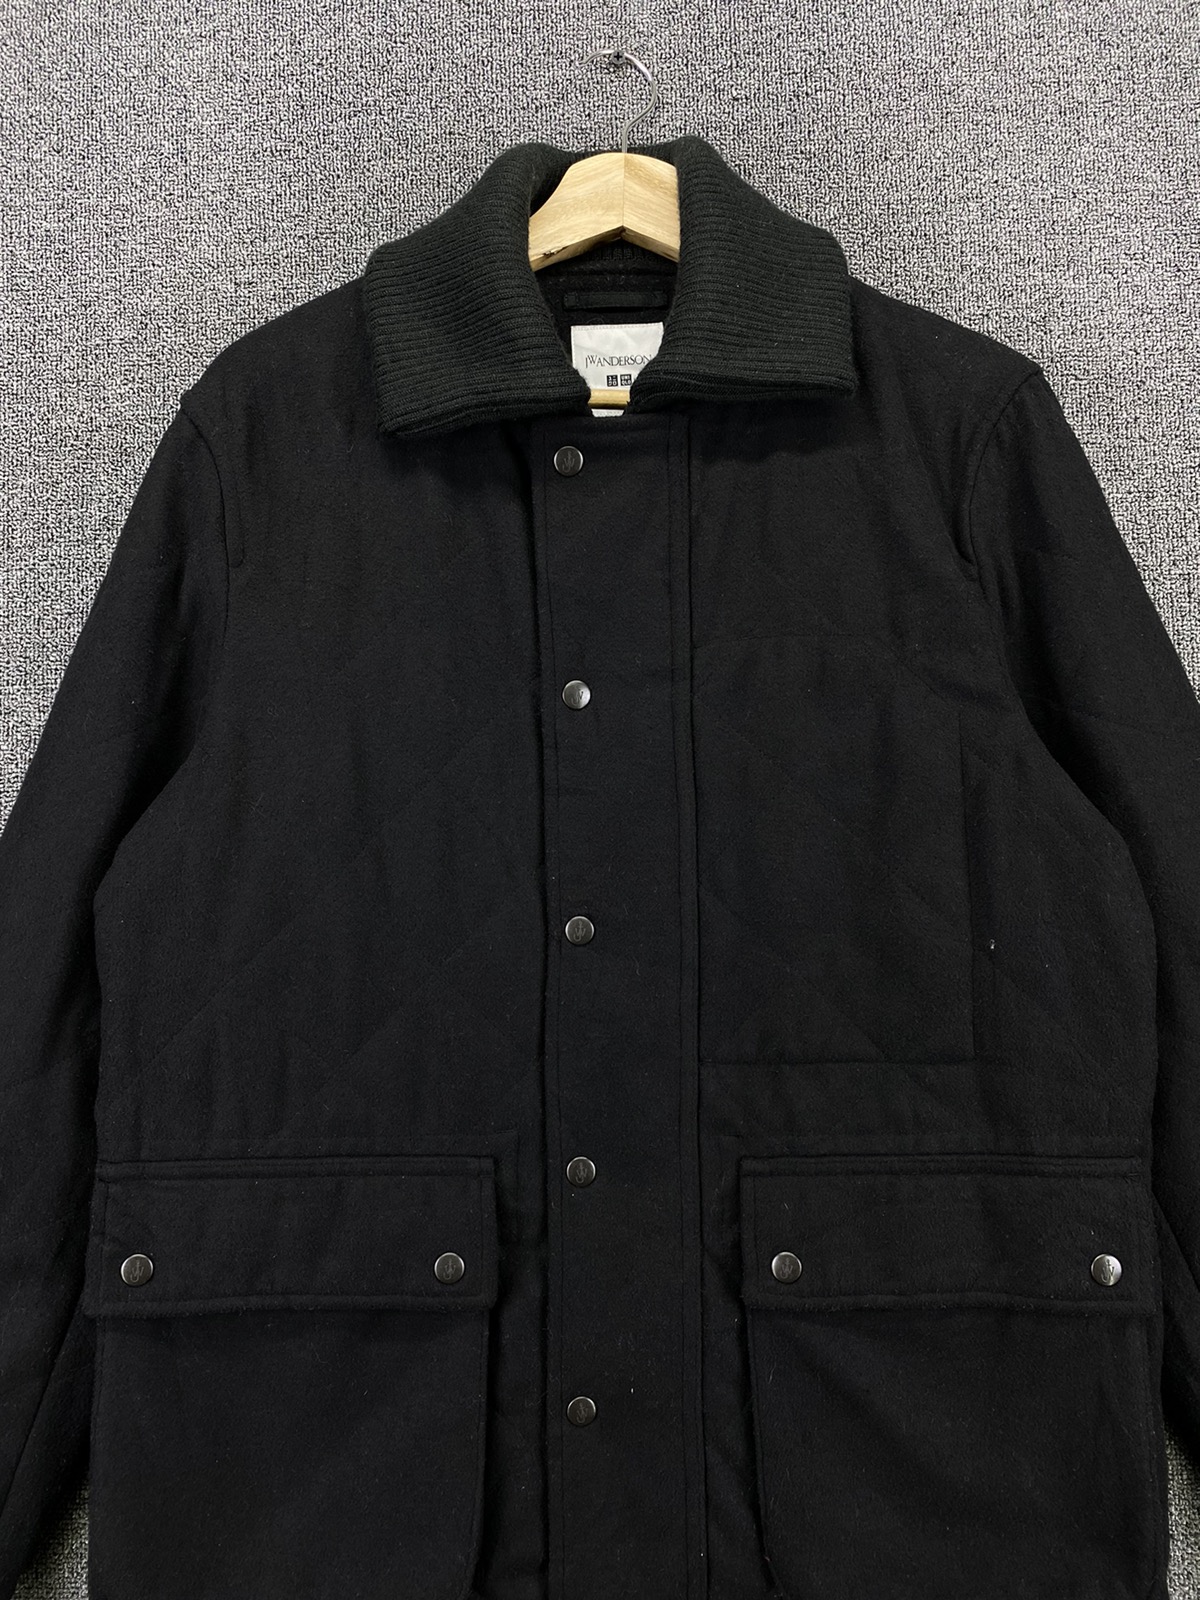 Uniqlo - J. W. Anderson x Uniqlo Double Pocket Quilted Wool Jacket - 5